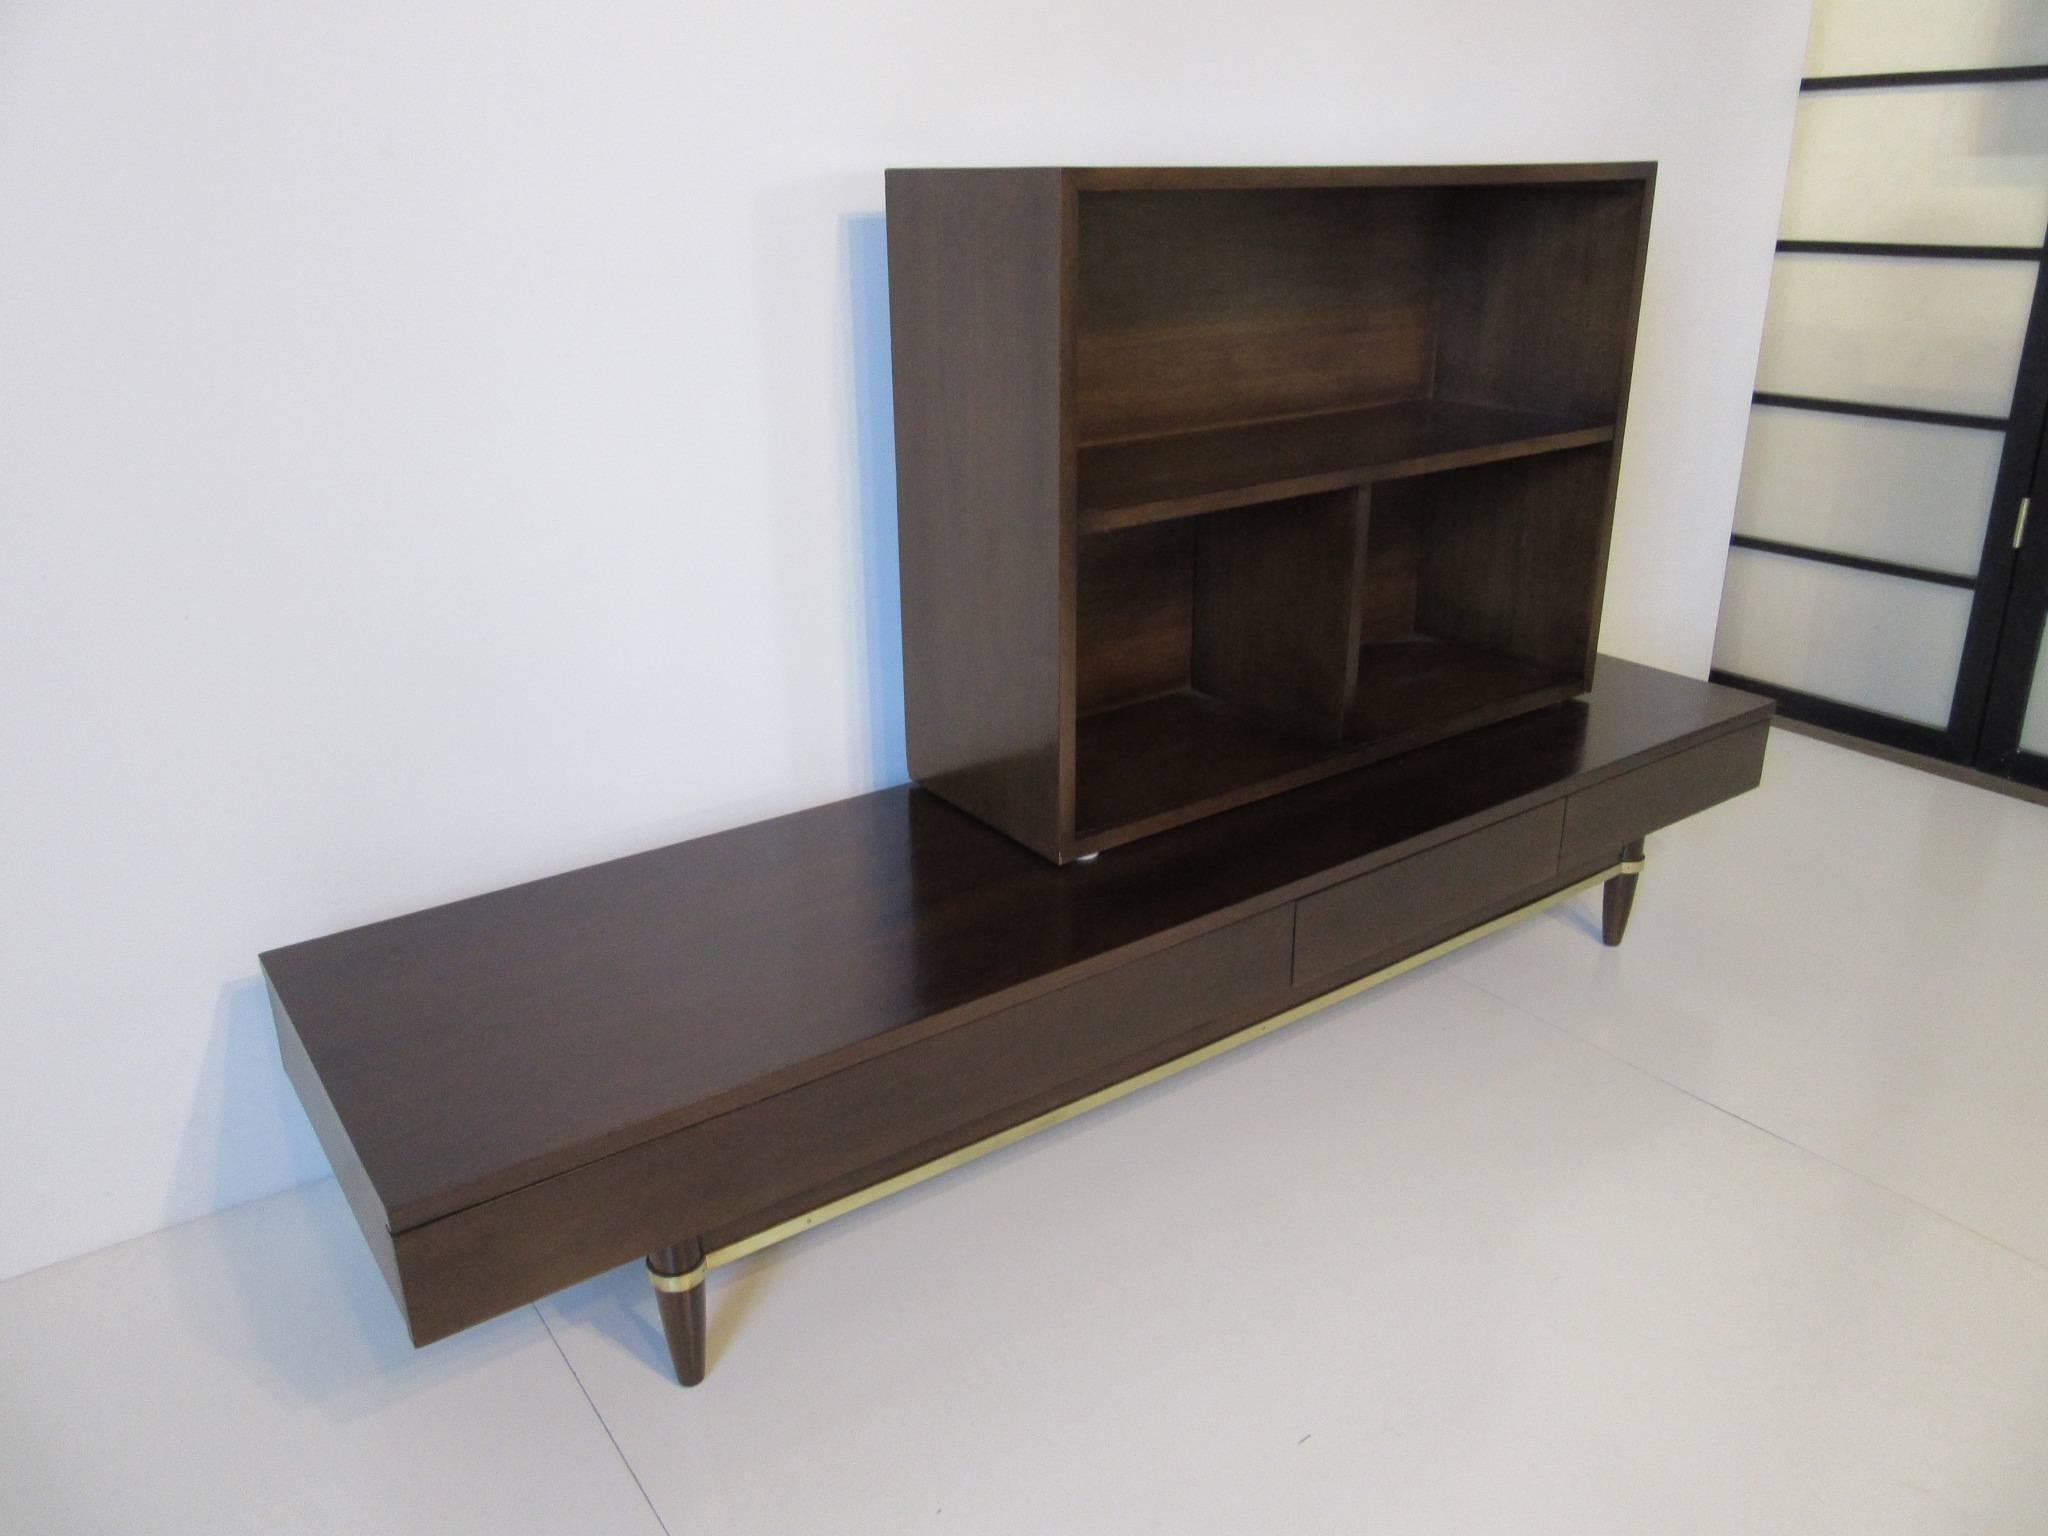 A two-piece ebony finished bookcase set with a lower three drawer platform accented with brass bands and having a upper three section bookcase. The bookcase can be adjusted to any area of the platform for ease of use. A well crafted piece